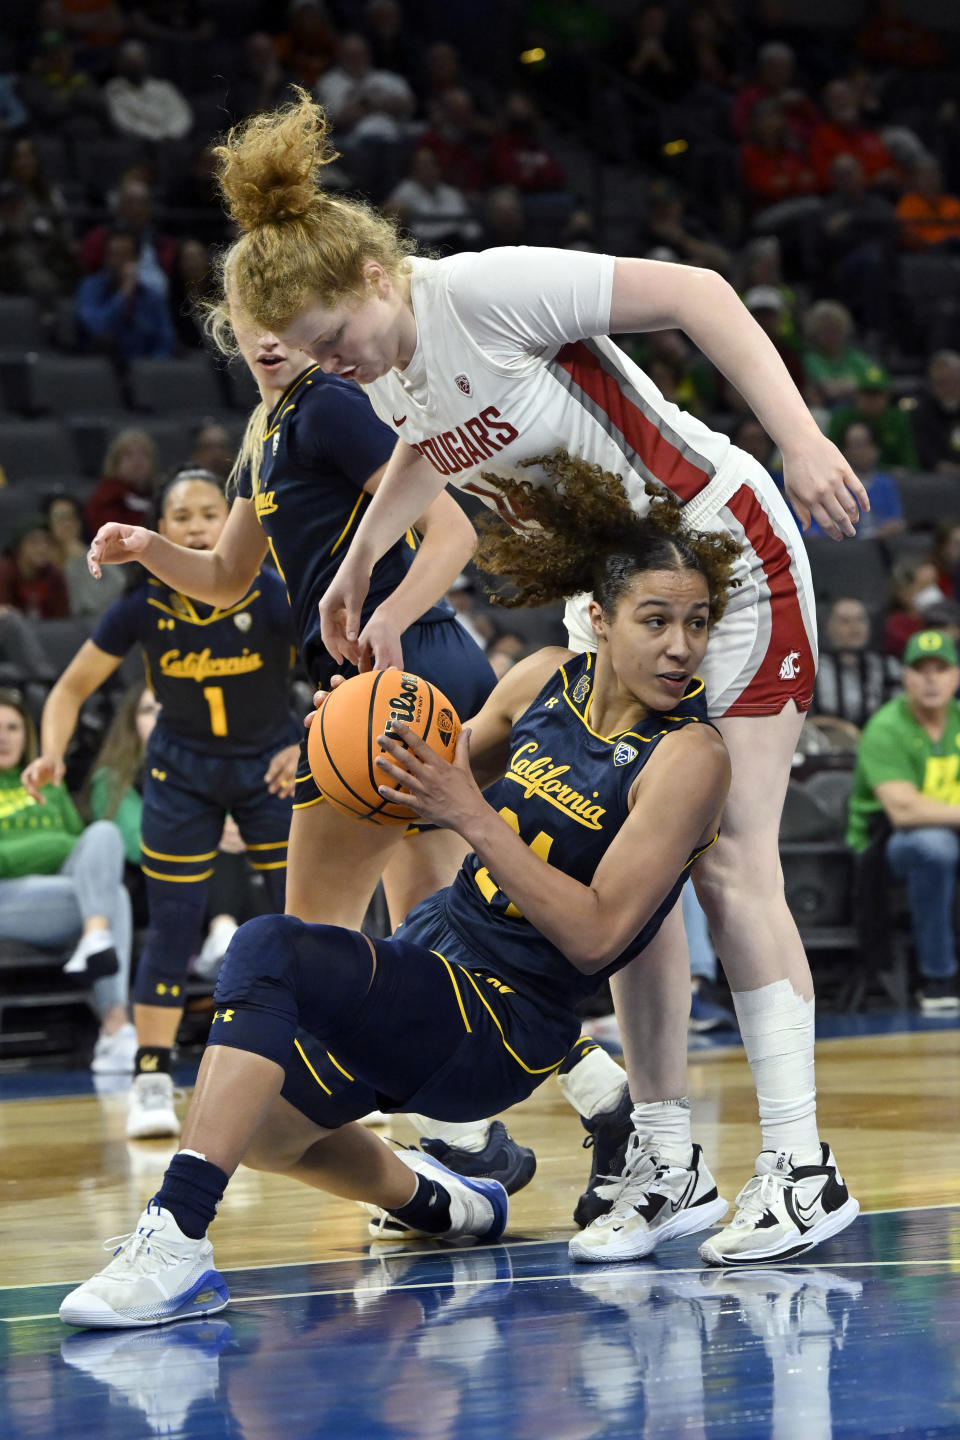 California forward Evelien Lutje Schipholt (24) falls to the court against Washington State center Jessica Clarke during the second half of an NCAA college basketball game in the first round of the Pac-12 women's tournament Wednesday, March 1, 2023, in Las Vegas. (AP Photo/David Becker)